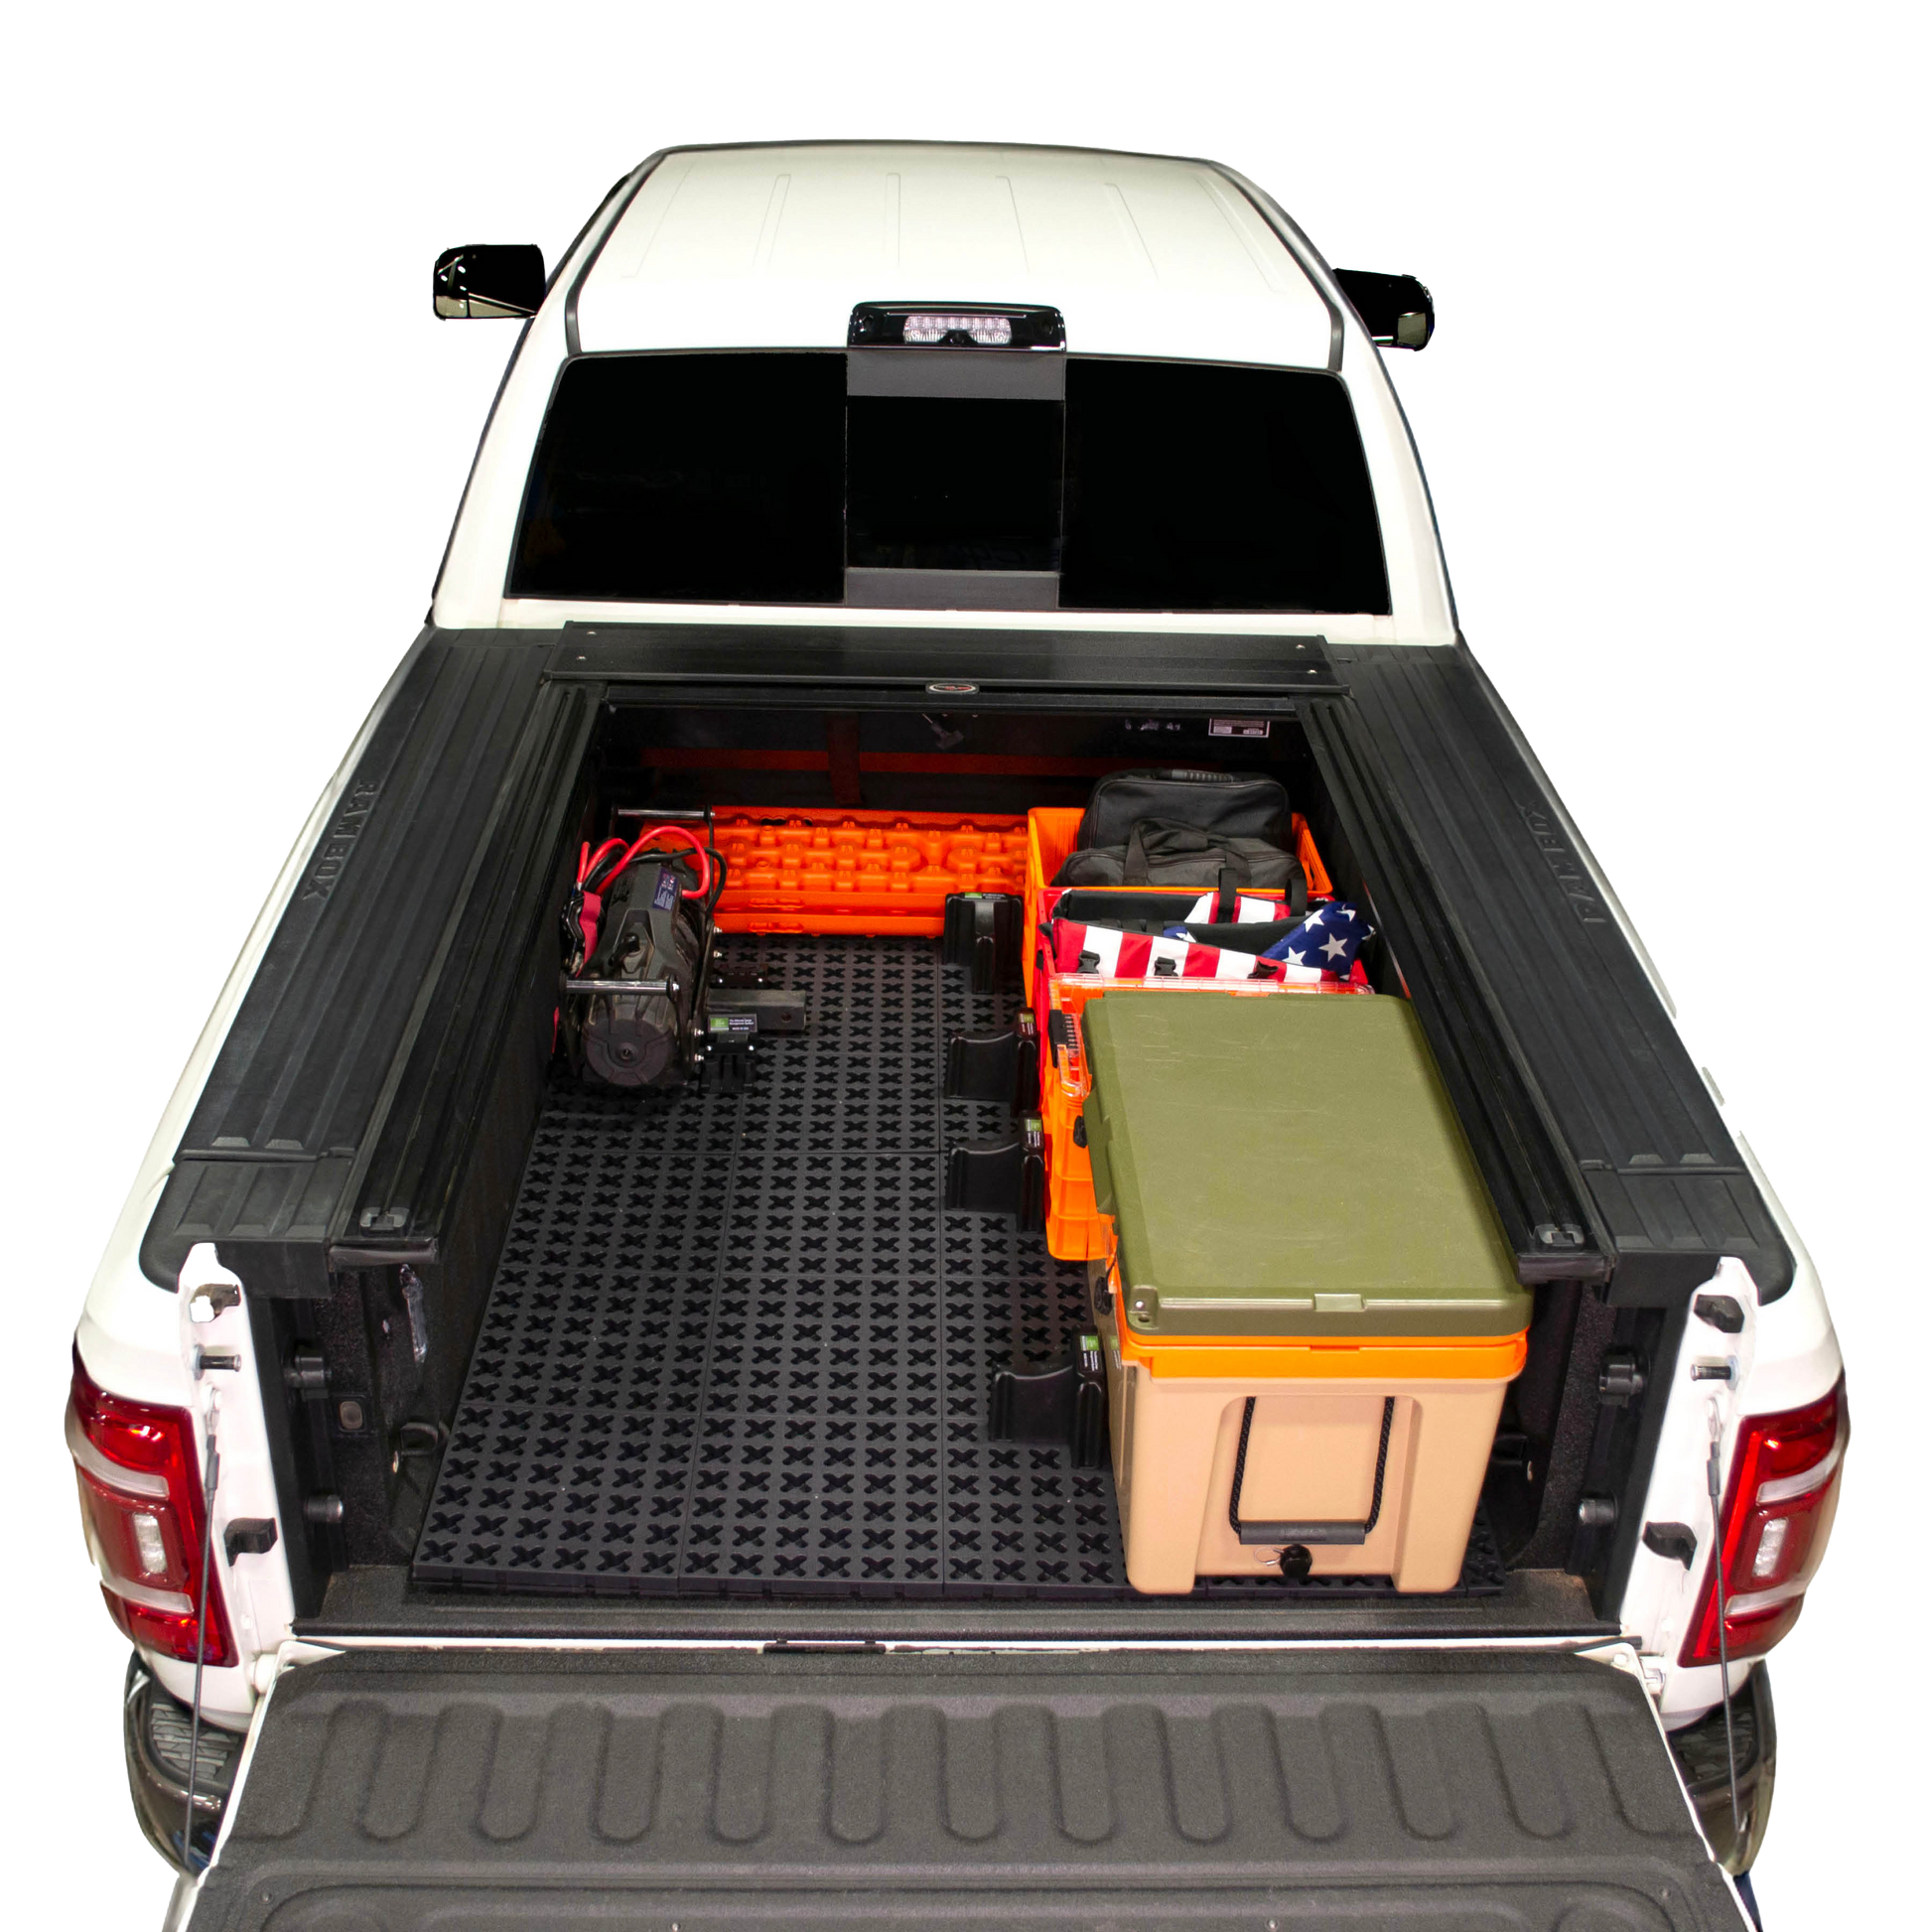 Tmat installed in a Ram 3500 securing a winch, recovery boards, Sidio crates, and a Rtic cooler. 